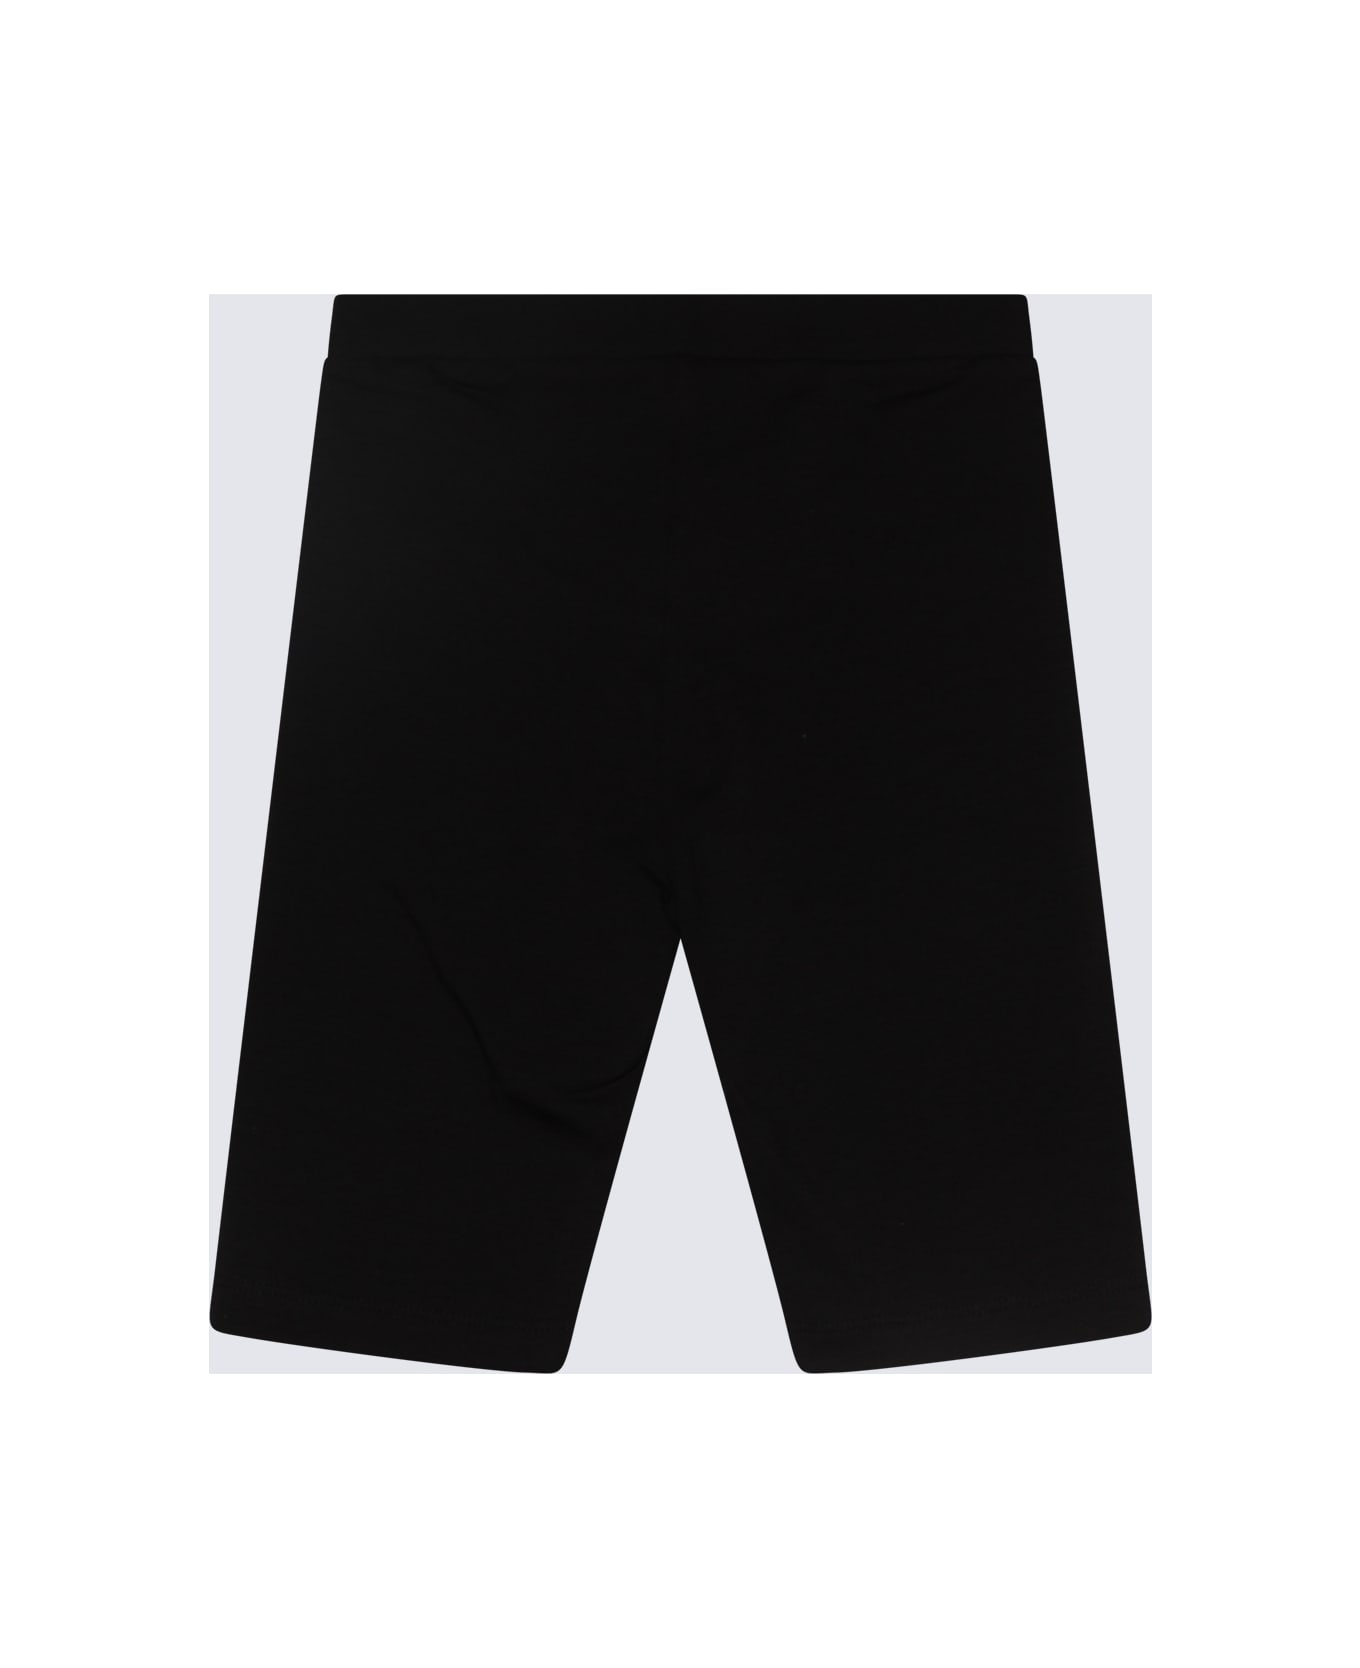 Moschino Black And White Cotton Blend Shorts - Black ボトムス